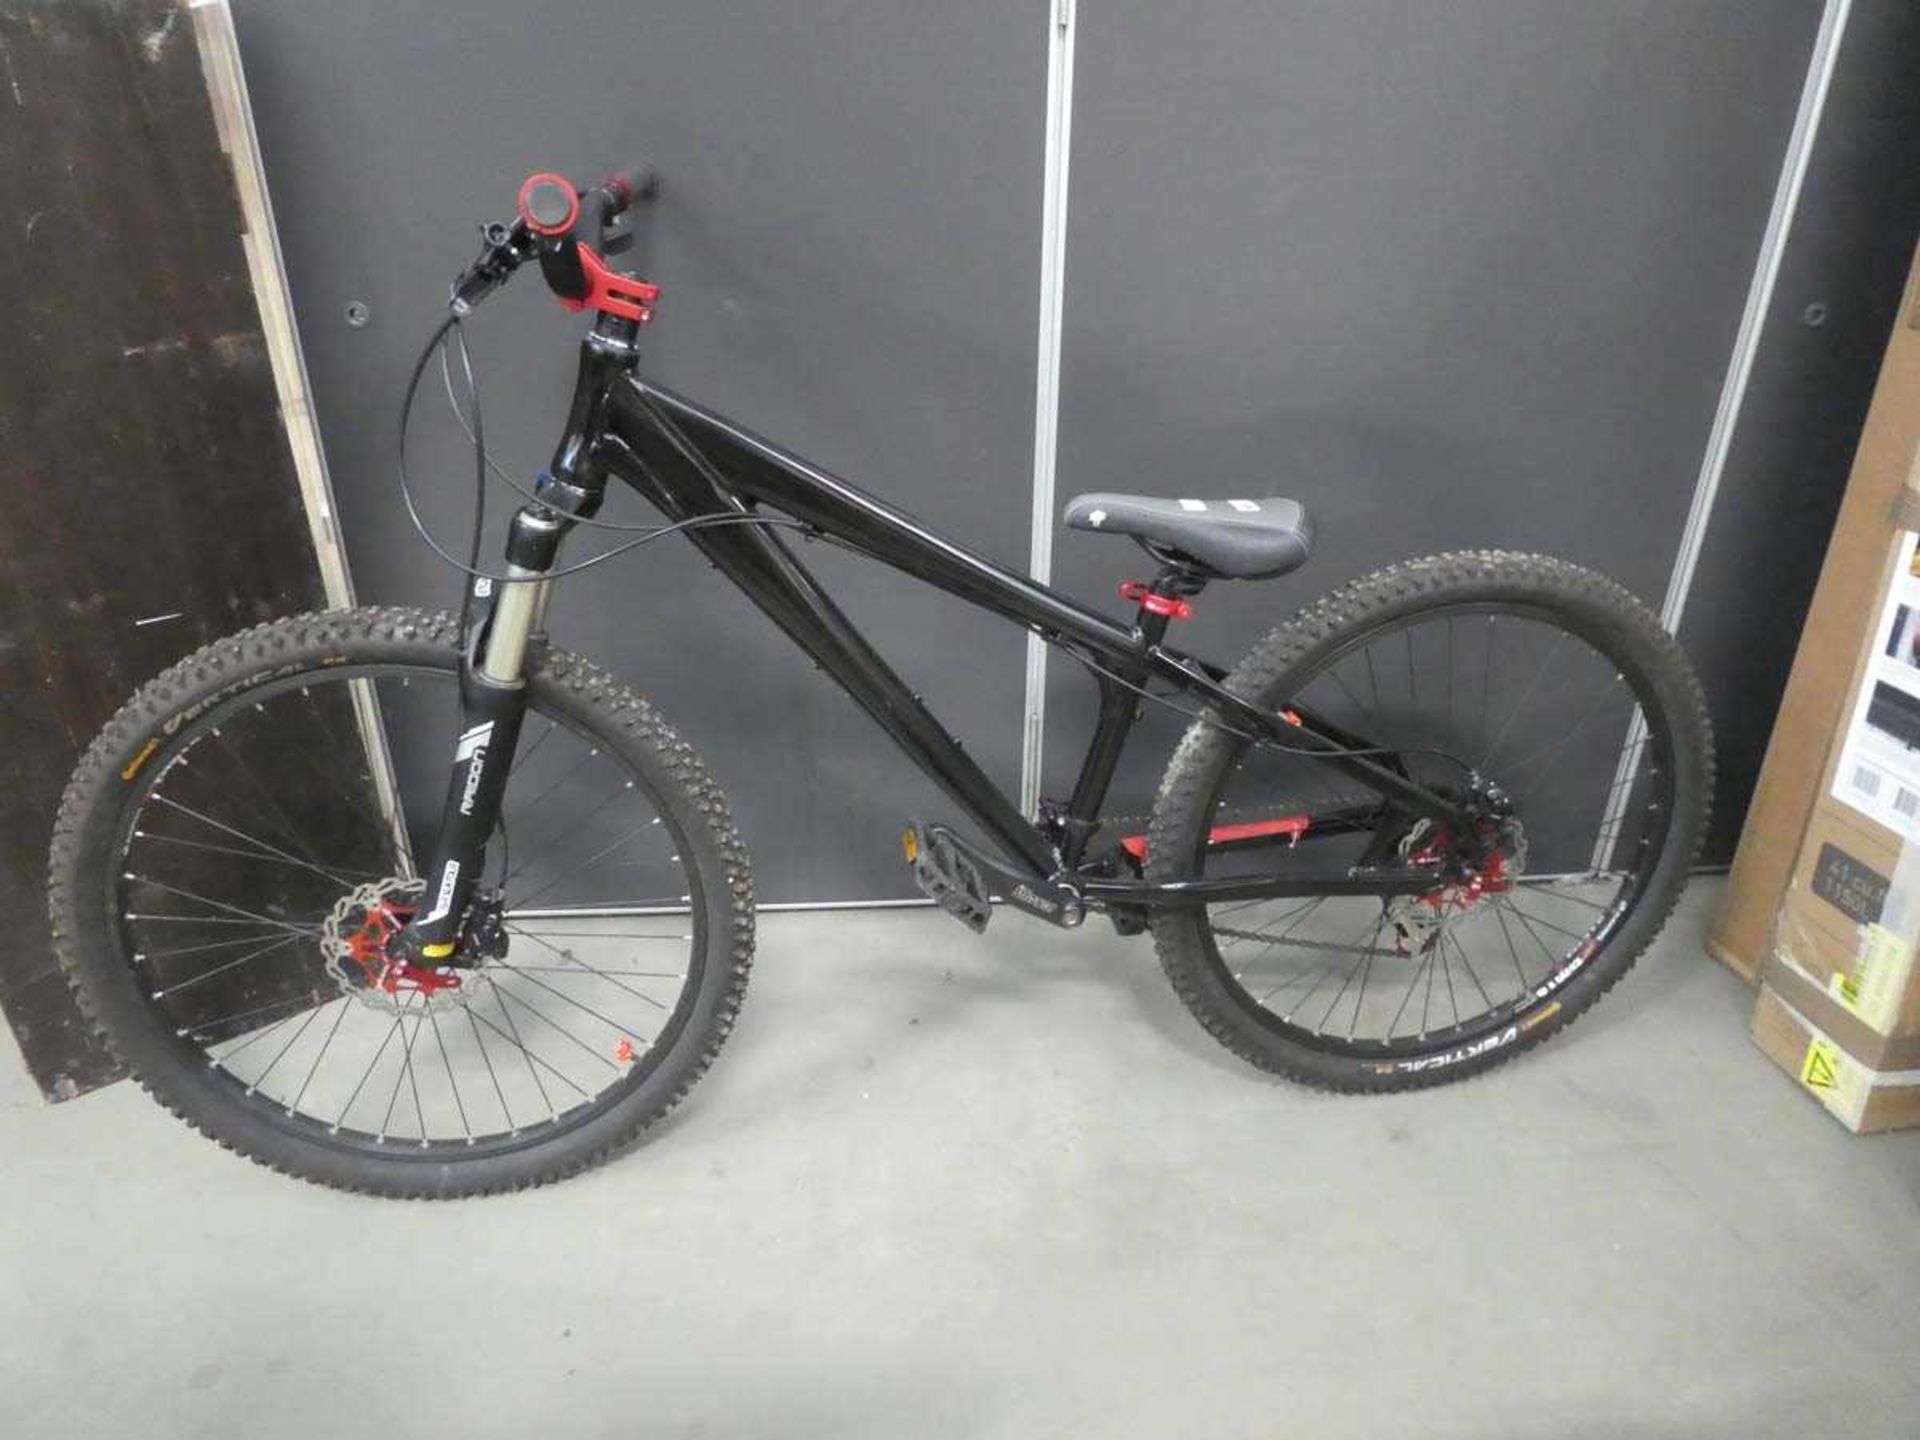 Black BMX style cycle with Raidon forks and Husseflet handle bars